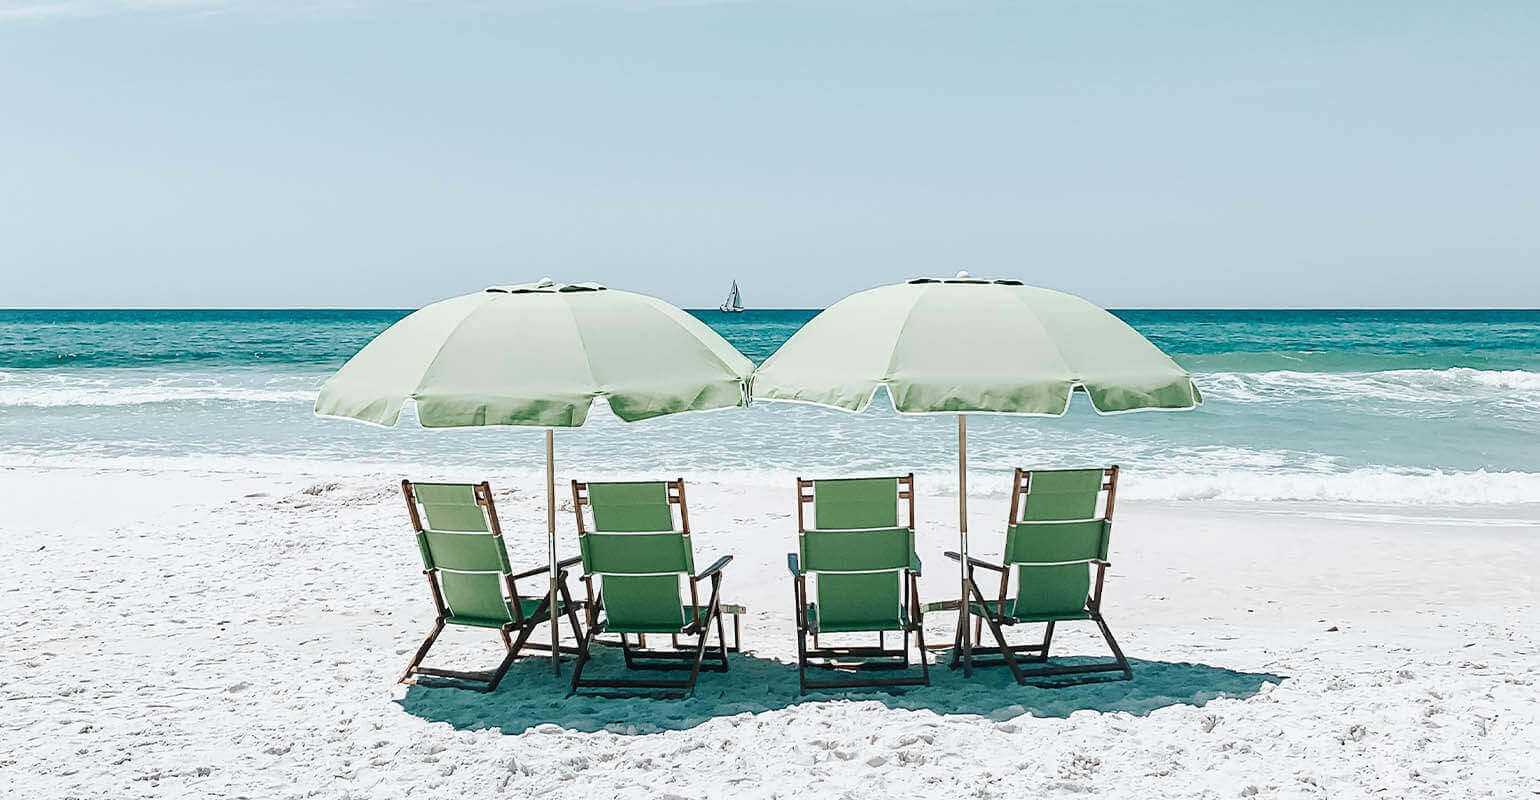 A clear photo of green chairs under umbrellas on beach sand